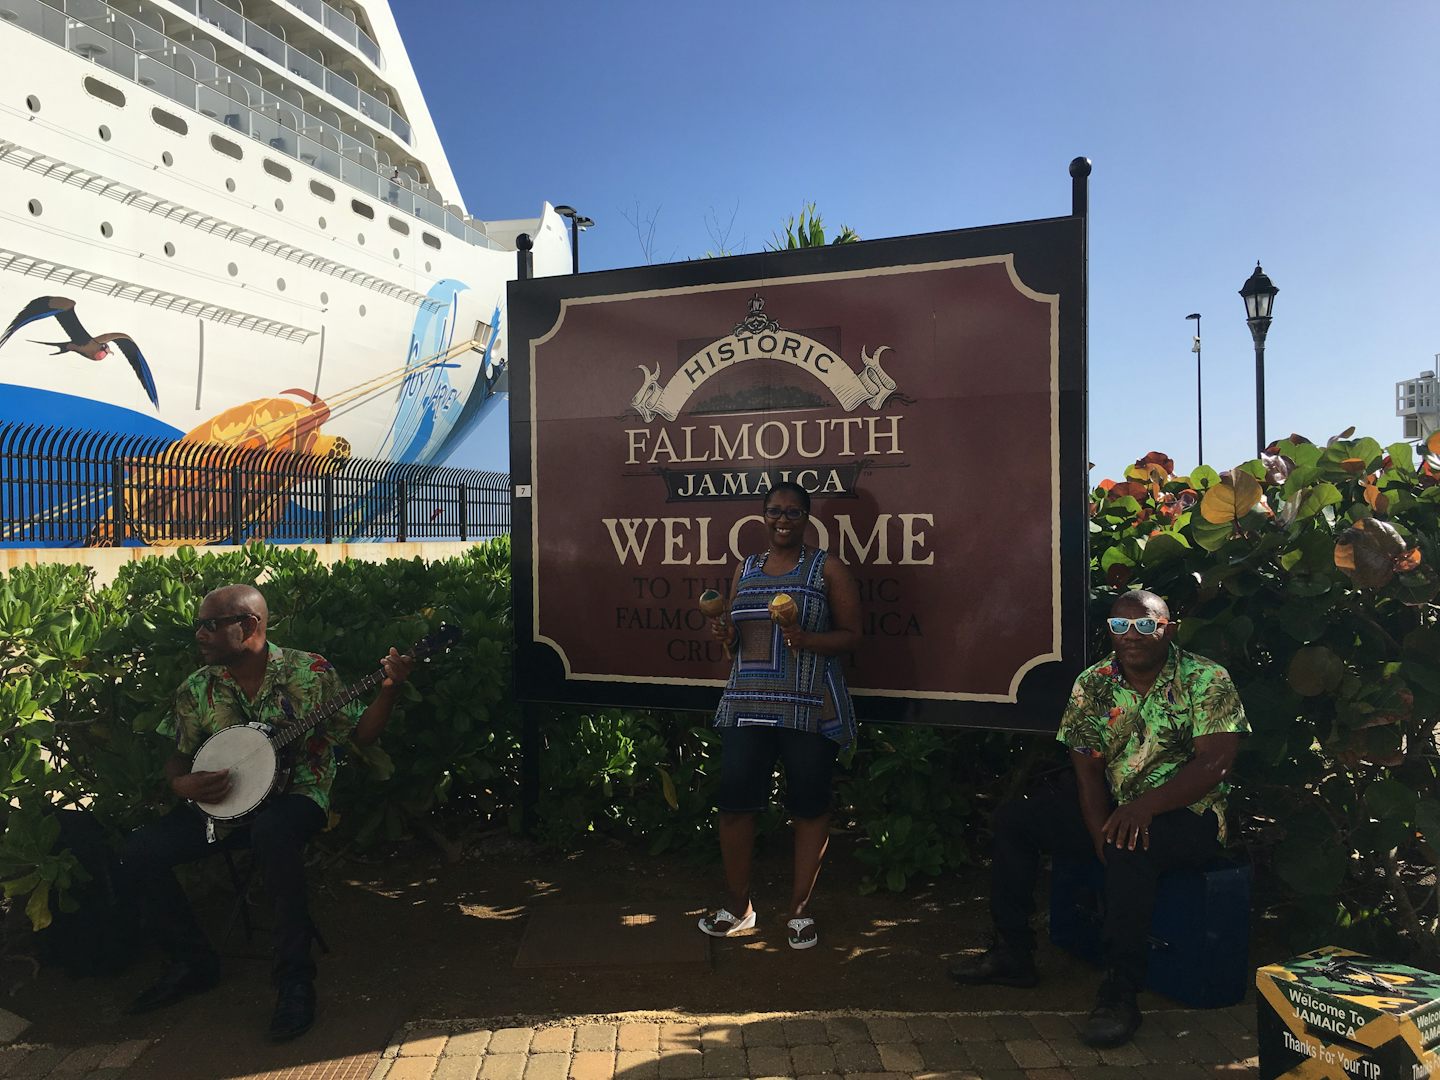 First step off the ship onto Jamaica land. Welcome to Jamaica!